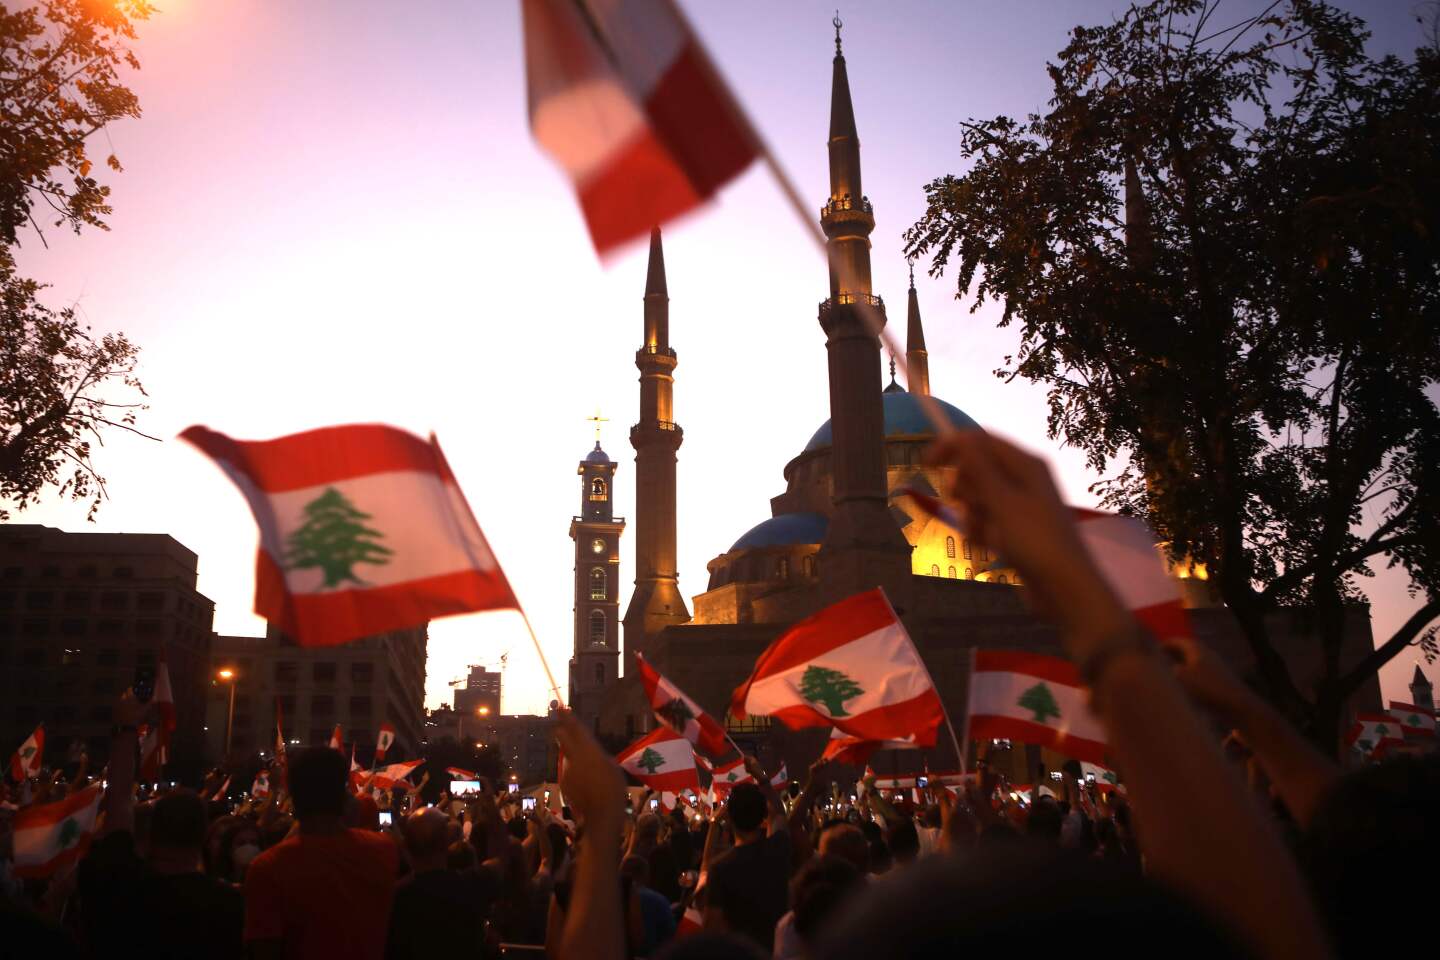 Lebanese demonstrators wave national flags as they take part in a protest in the capital Beirut, outside the Mohammad al-Amin mosque in the downtown district's Martyr's Square on October 19, 2019. - Tens of thousands of Lebanese people took to the streets today for a third day of protests against tax increases and alleged official corruption despite several arrests by security forces. (Photo by Patrick BAZ / AFP) (Photo by PATRICK BAZ/AFP via Getty Images) ** OUTS - ELSENT, FPG, CM - OUTS * NM, PH, VA if sourced by CT, LA or MoD **